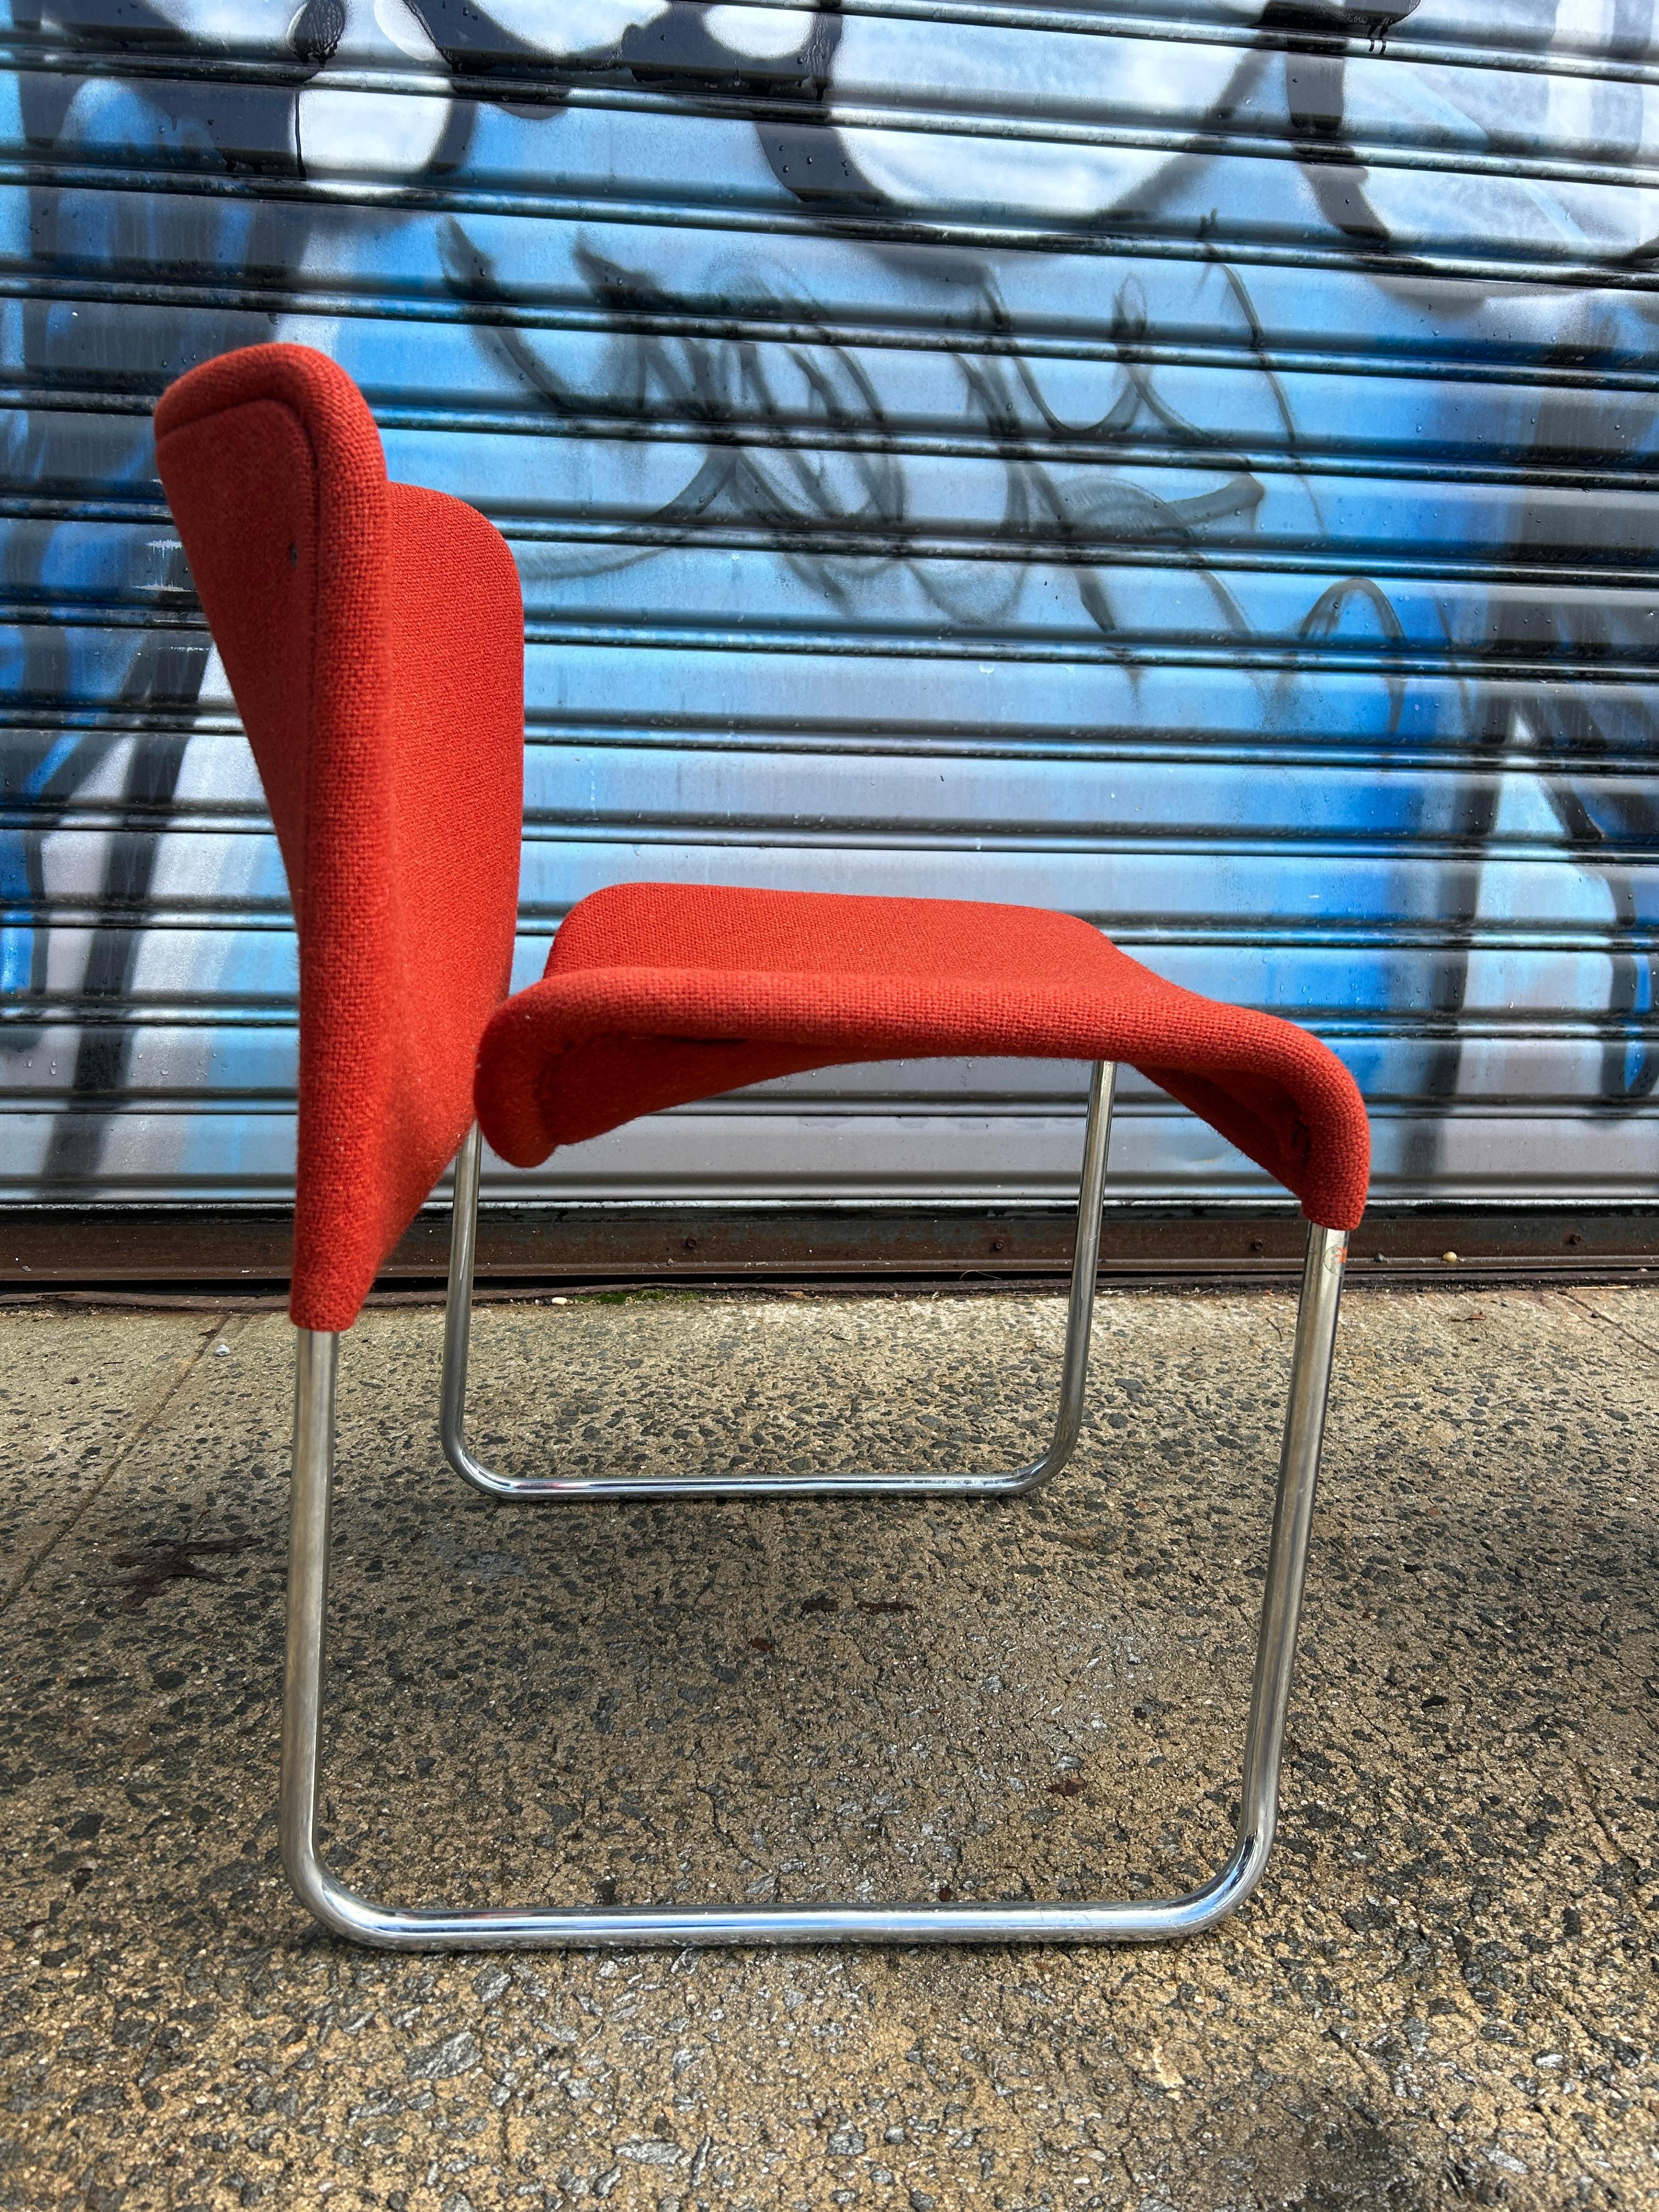 Wool Rare Set (4) Ecco chrome red woven wool Stackable chairs by Møre Design team For Sale